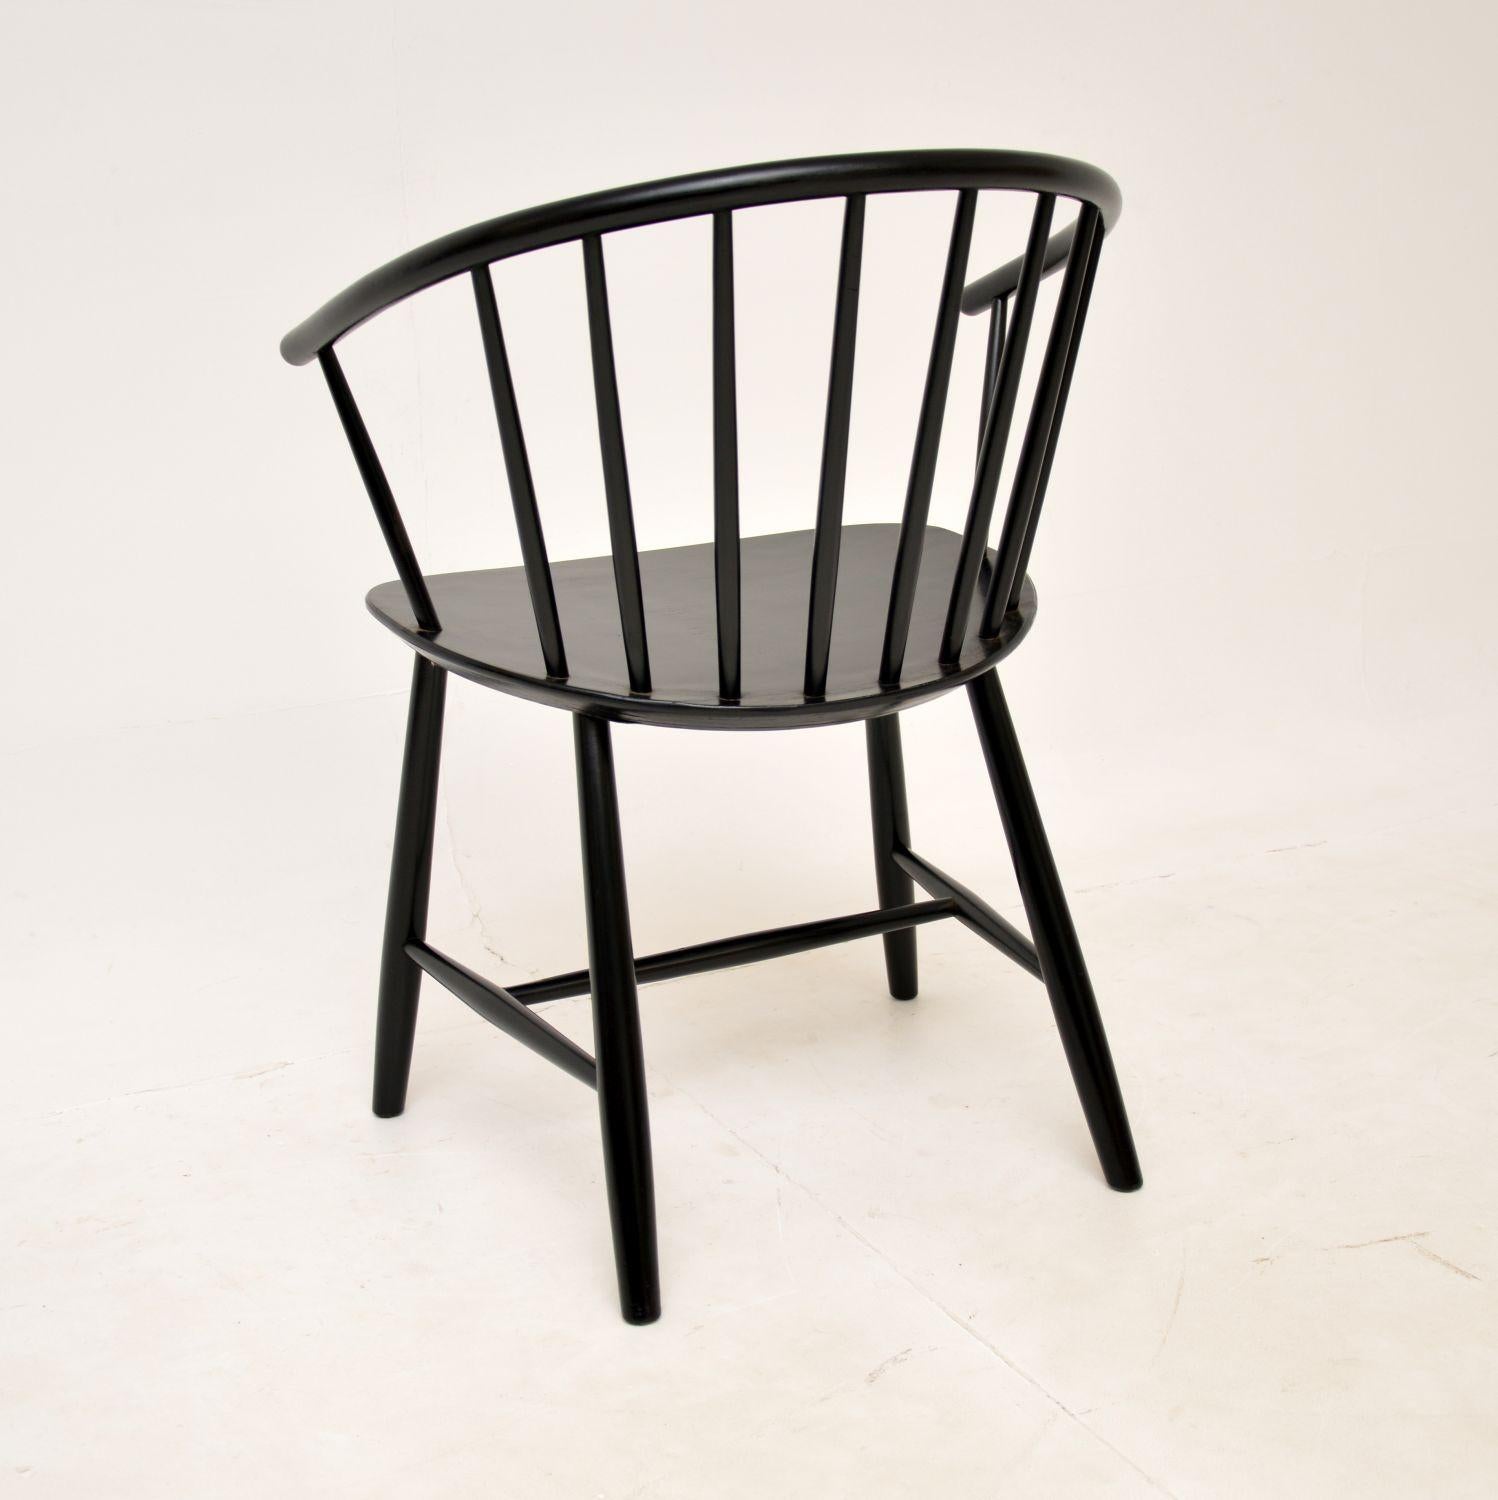 Danish Vintage Side Chair J64 by Ejvind Johansson In Good Condition For Sale In London, GB